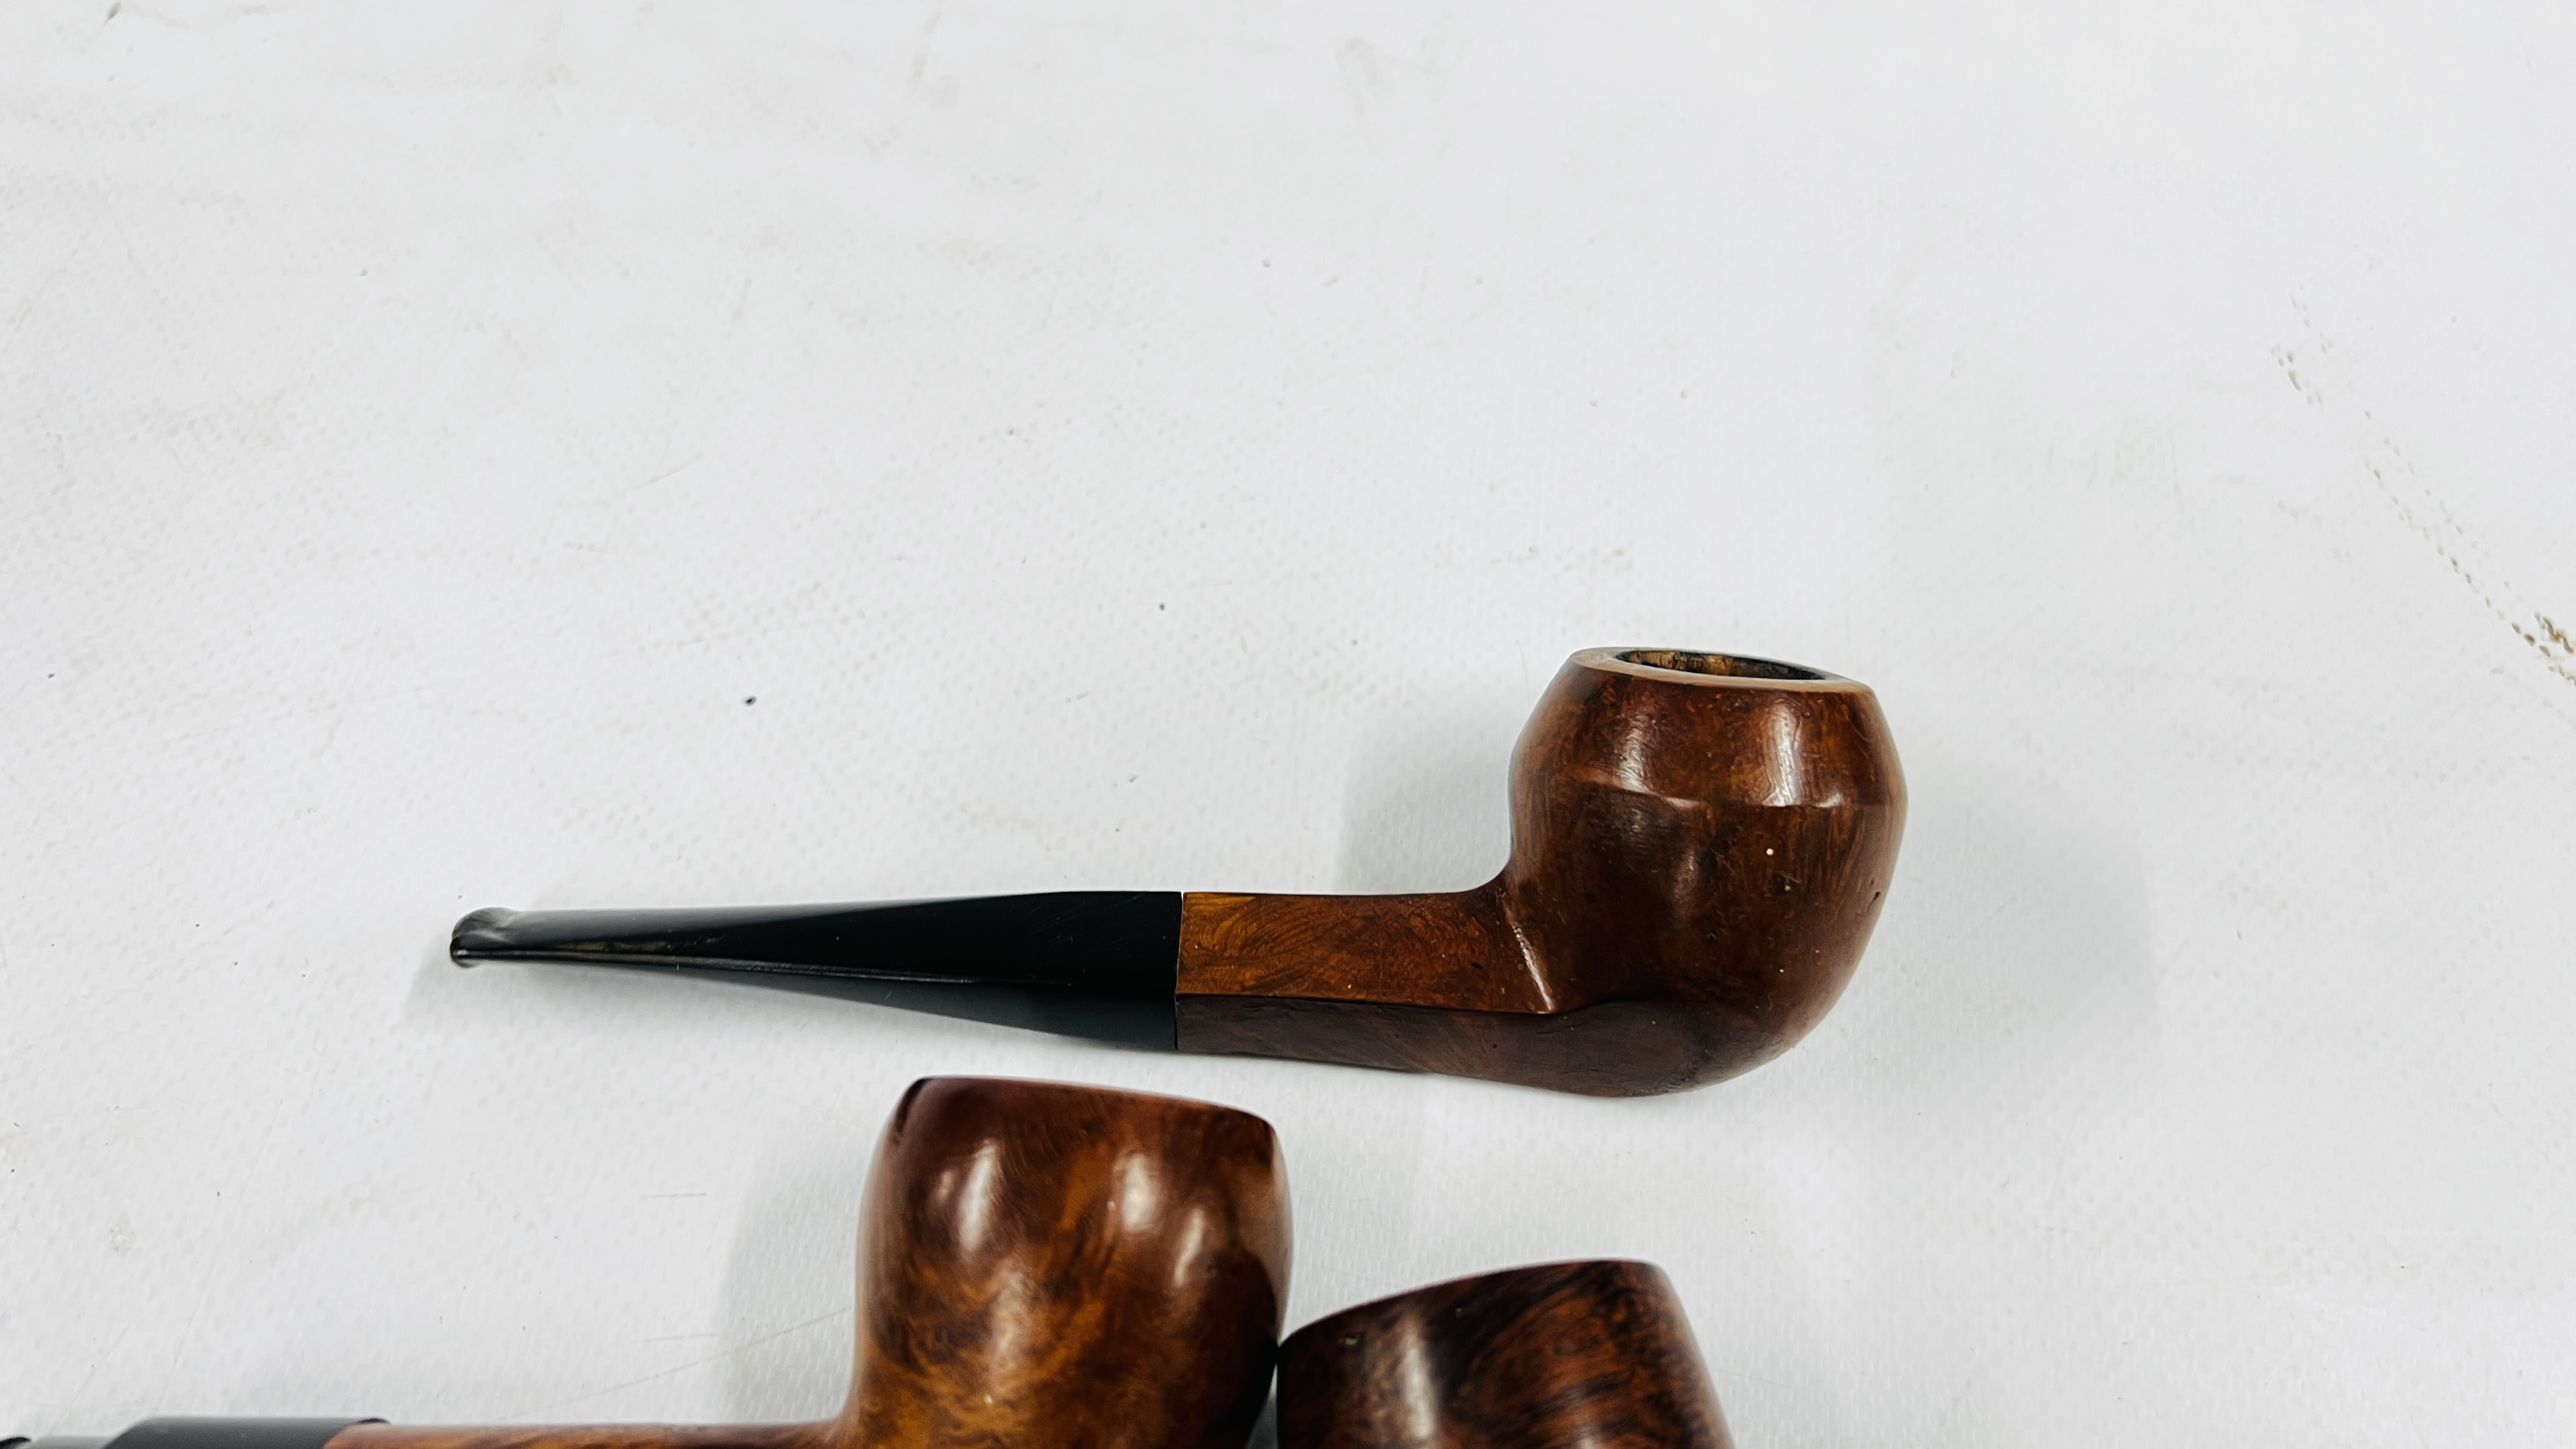 A GROUP OF 5 VINTAGE TOBACCO SMOKING PIPES TO INCLUDE EXAMPLES MARKED F & T, HARDCASTLE ETC. - Image 7 of 12